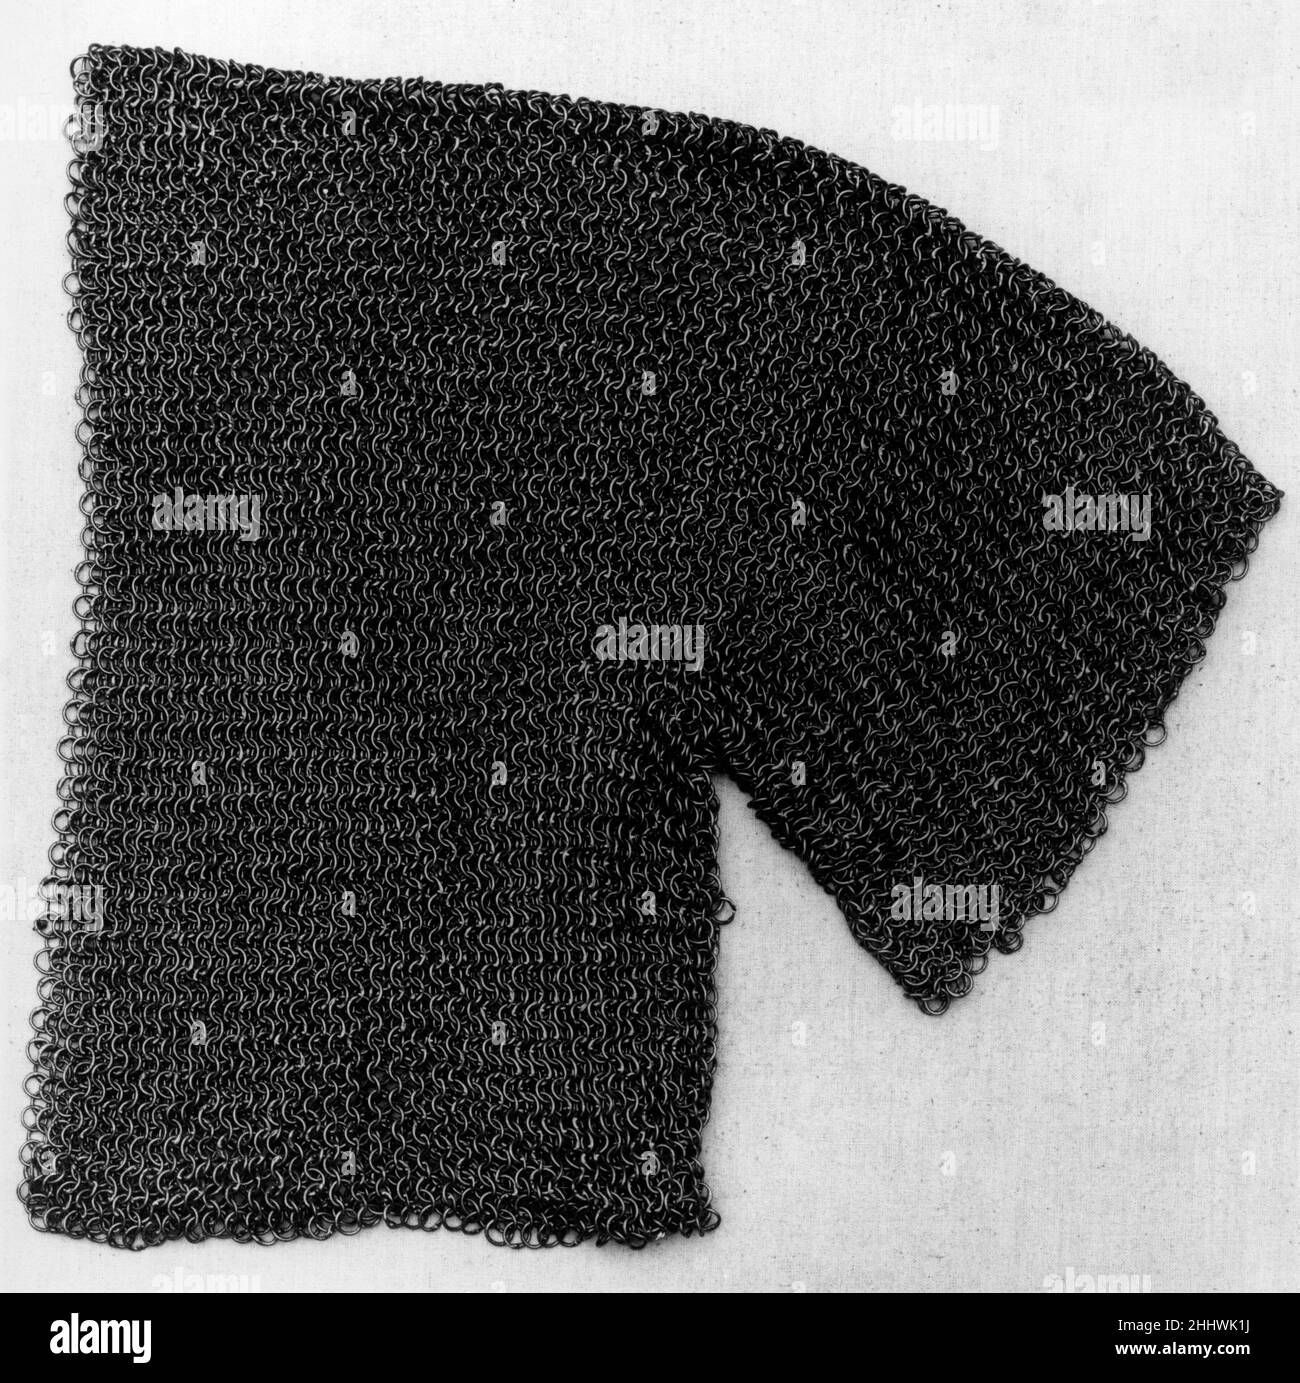 Sleeve of Mail 16th century German From about the third century B.C. through the early fourteenth century A.D., mail, also called chain mail, was the predominant and most effective type of body armor known in Europe. From about the mid-fifteenth century onward, mail was used in conjunction with full plate armor to fill the gaps between plates. Separate mail sleeves were made to be worn with a cuirass (breastplate and backplate); shaped panels of mail called gussets, covered the armpits or the crooks of the elbows and were attached to arming jackets, garments specially tailored to be worn under Stock Photo